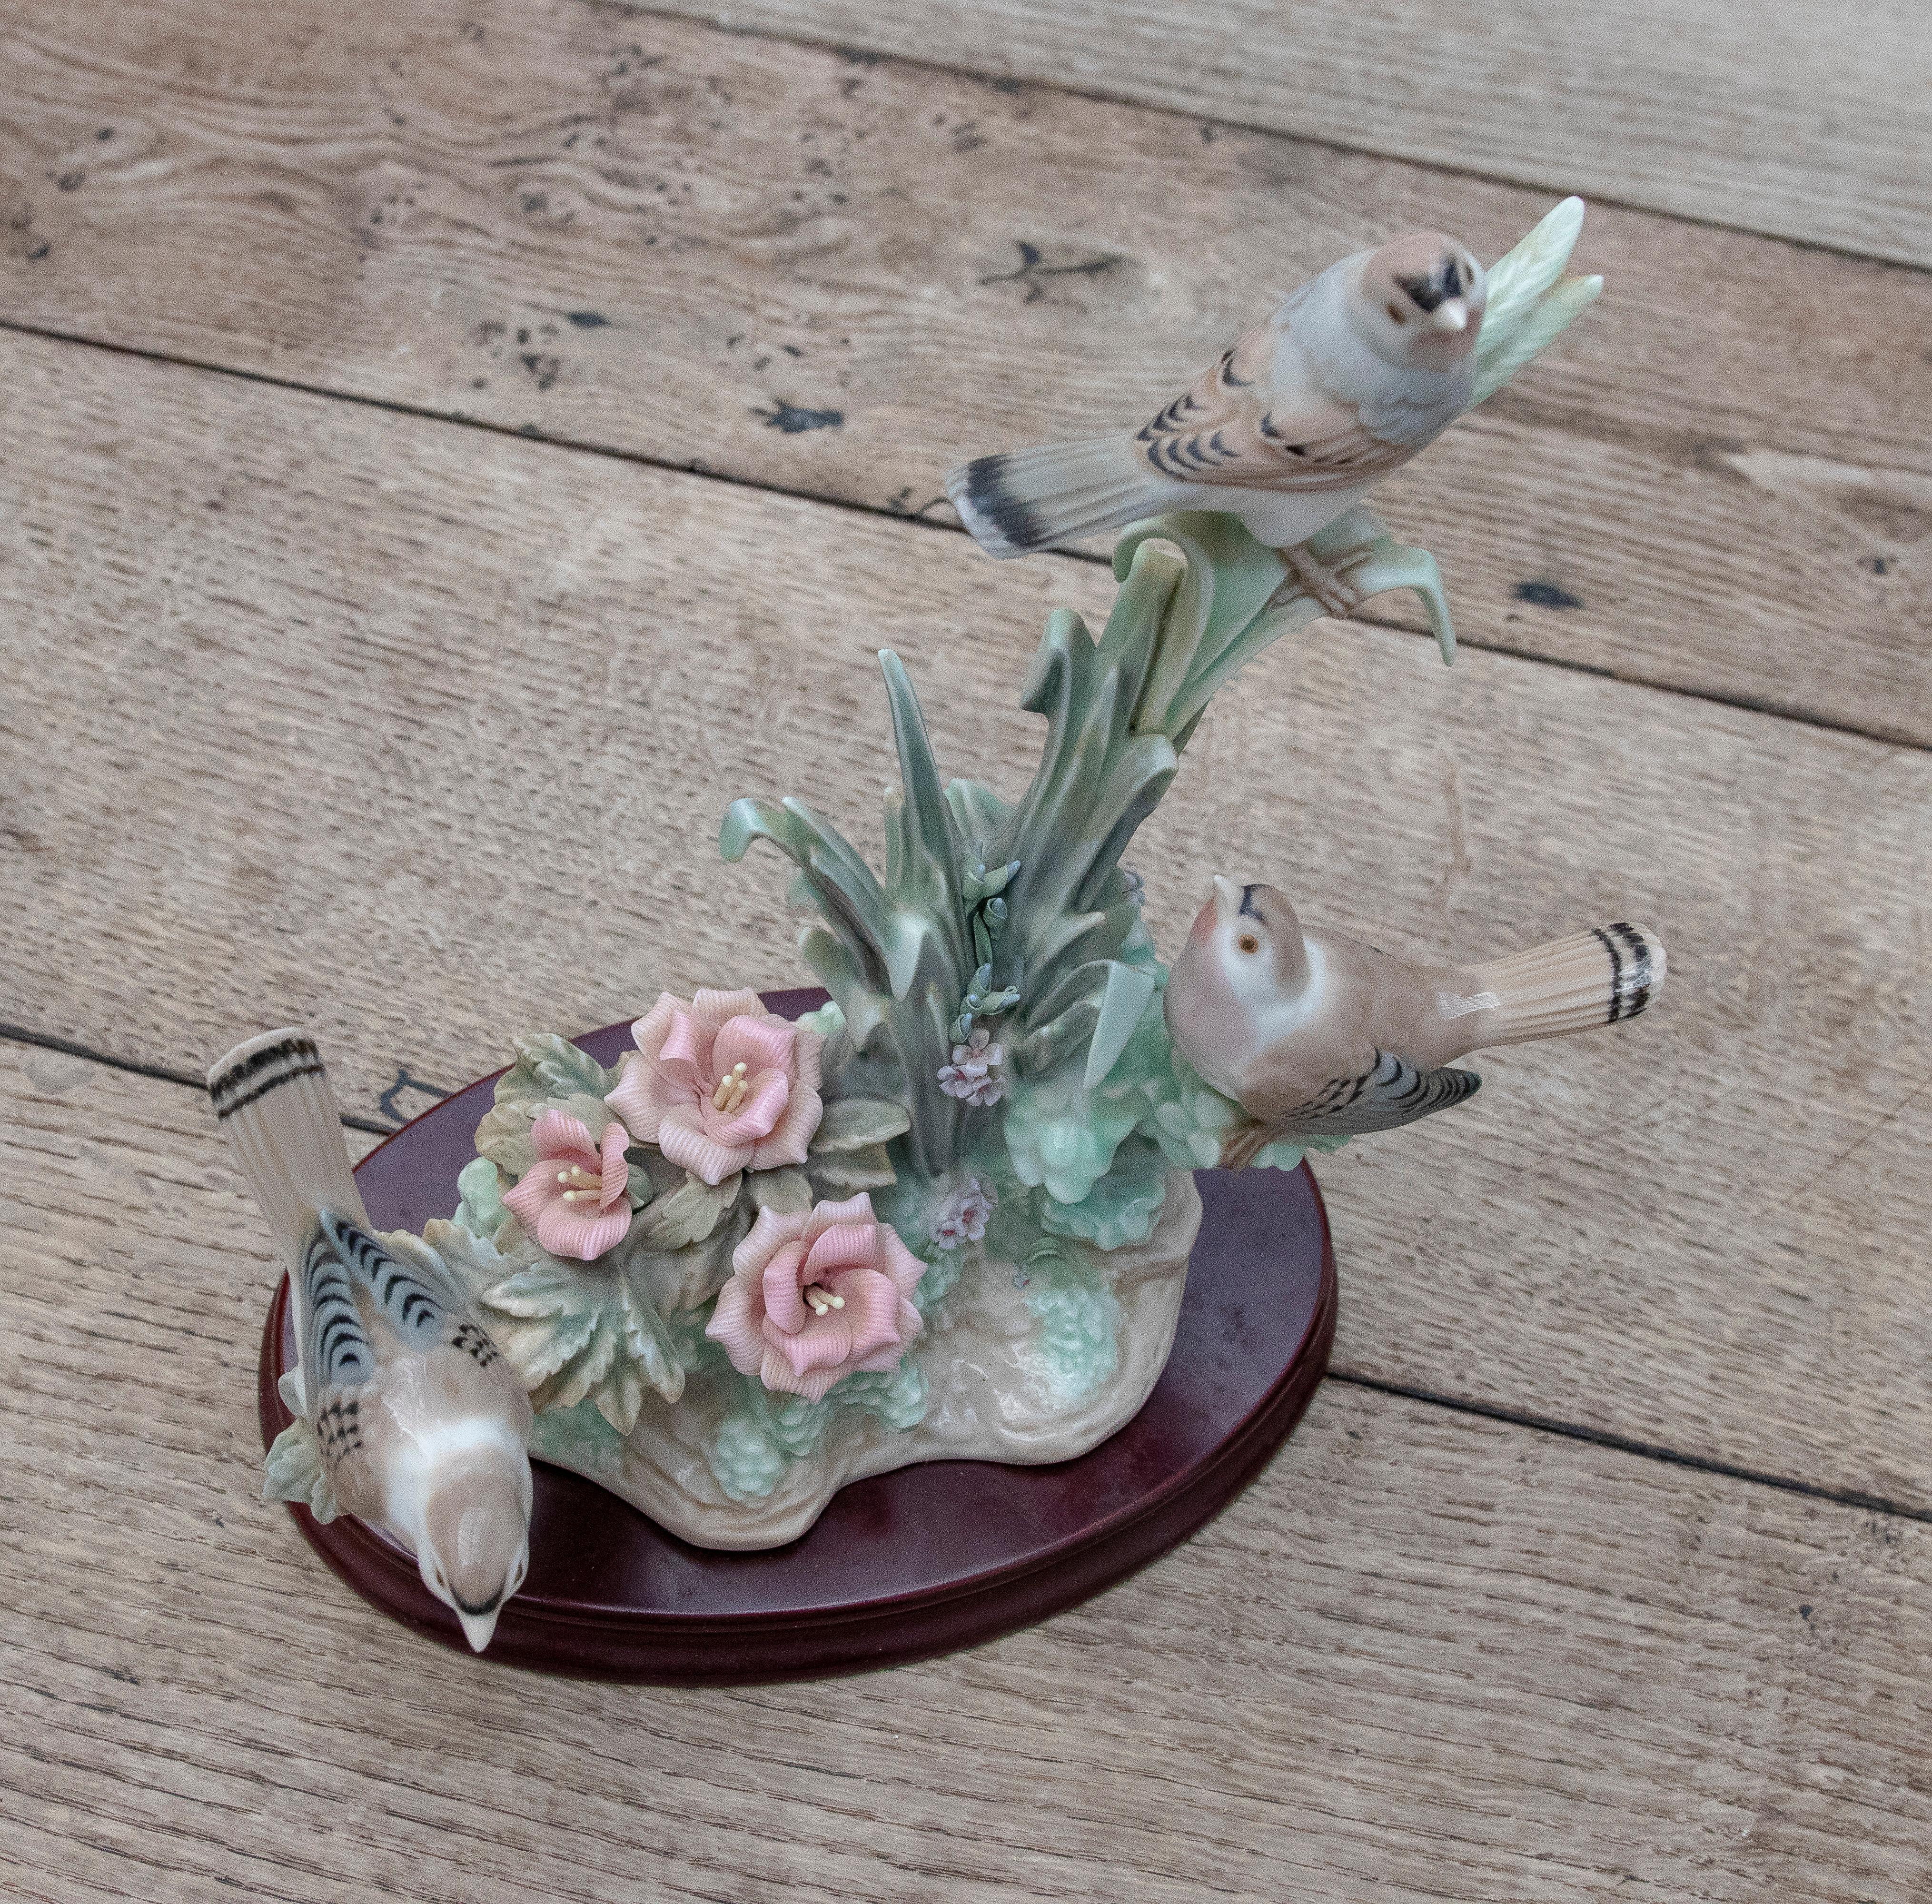 Lladró Porcelain Figurine of a Group of Birds Dated from 1978 For Sale 4